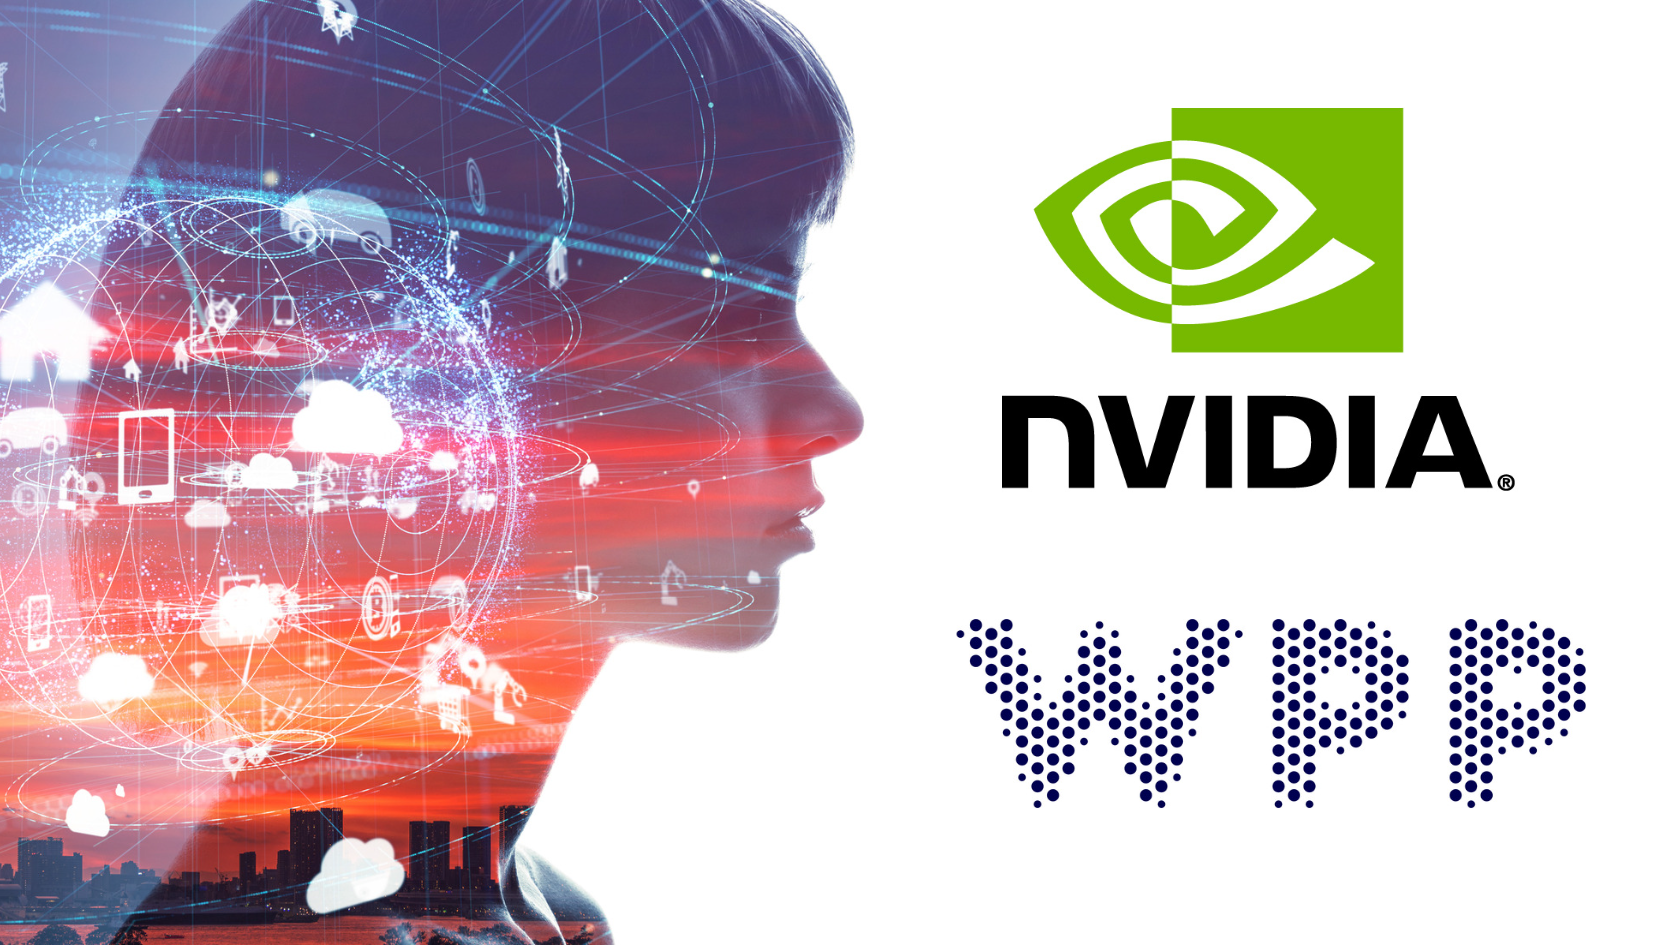 WPP, NVIDIA to build AI-powered engine for digital advertising